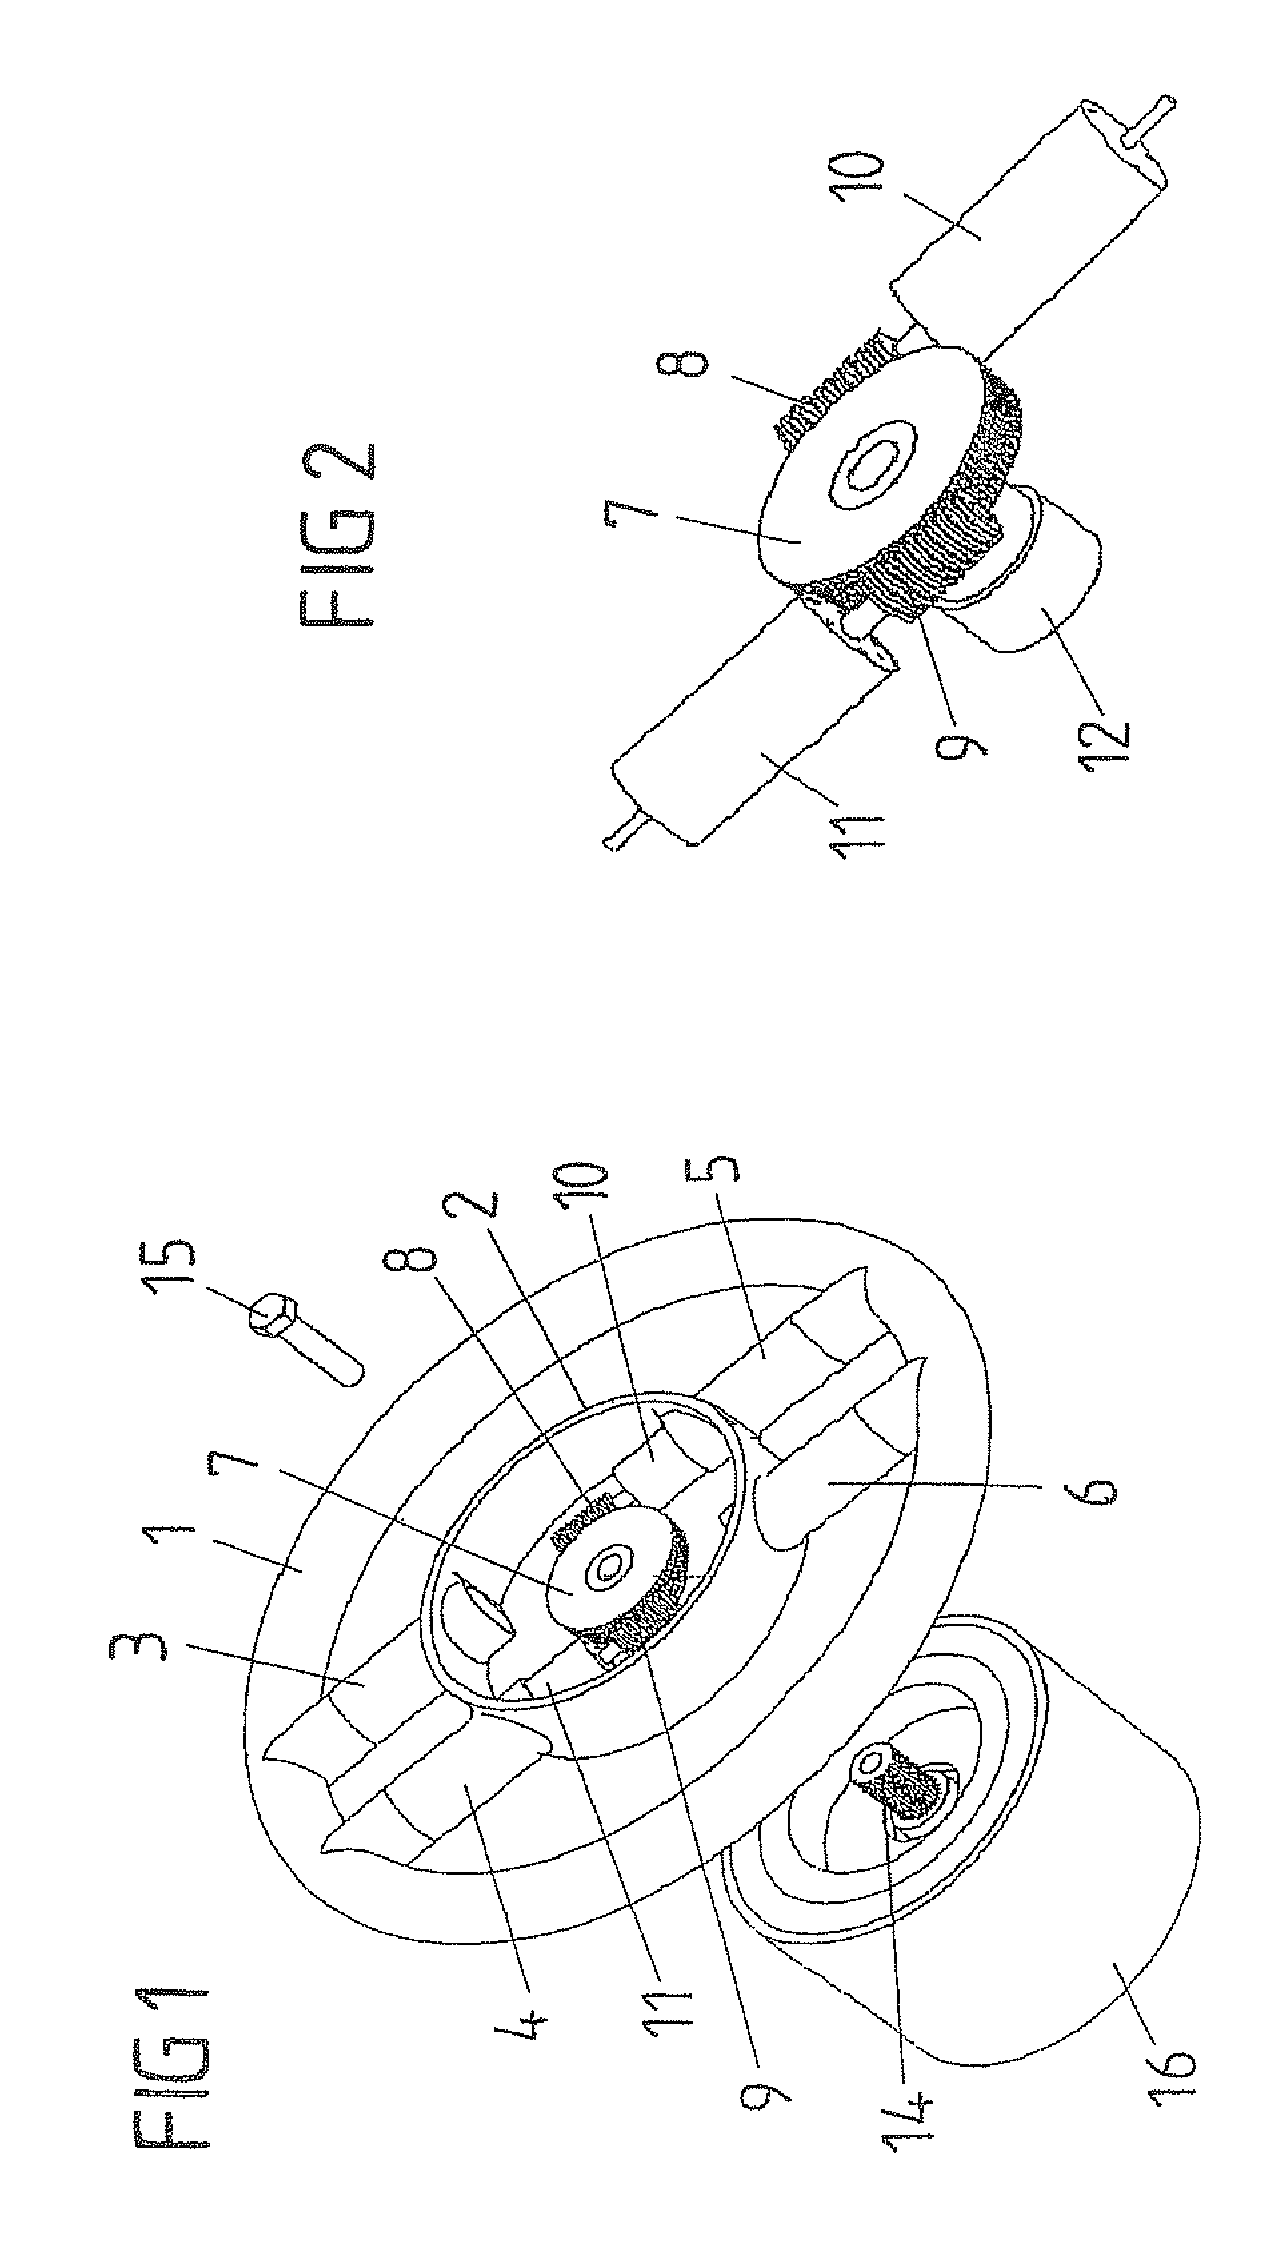 Steering device for a superposition steering system